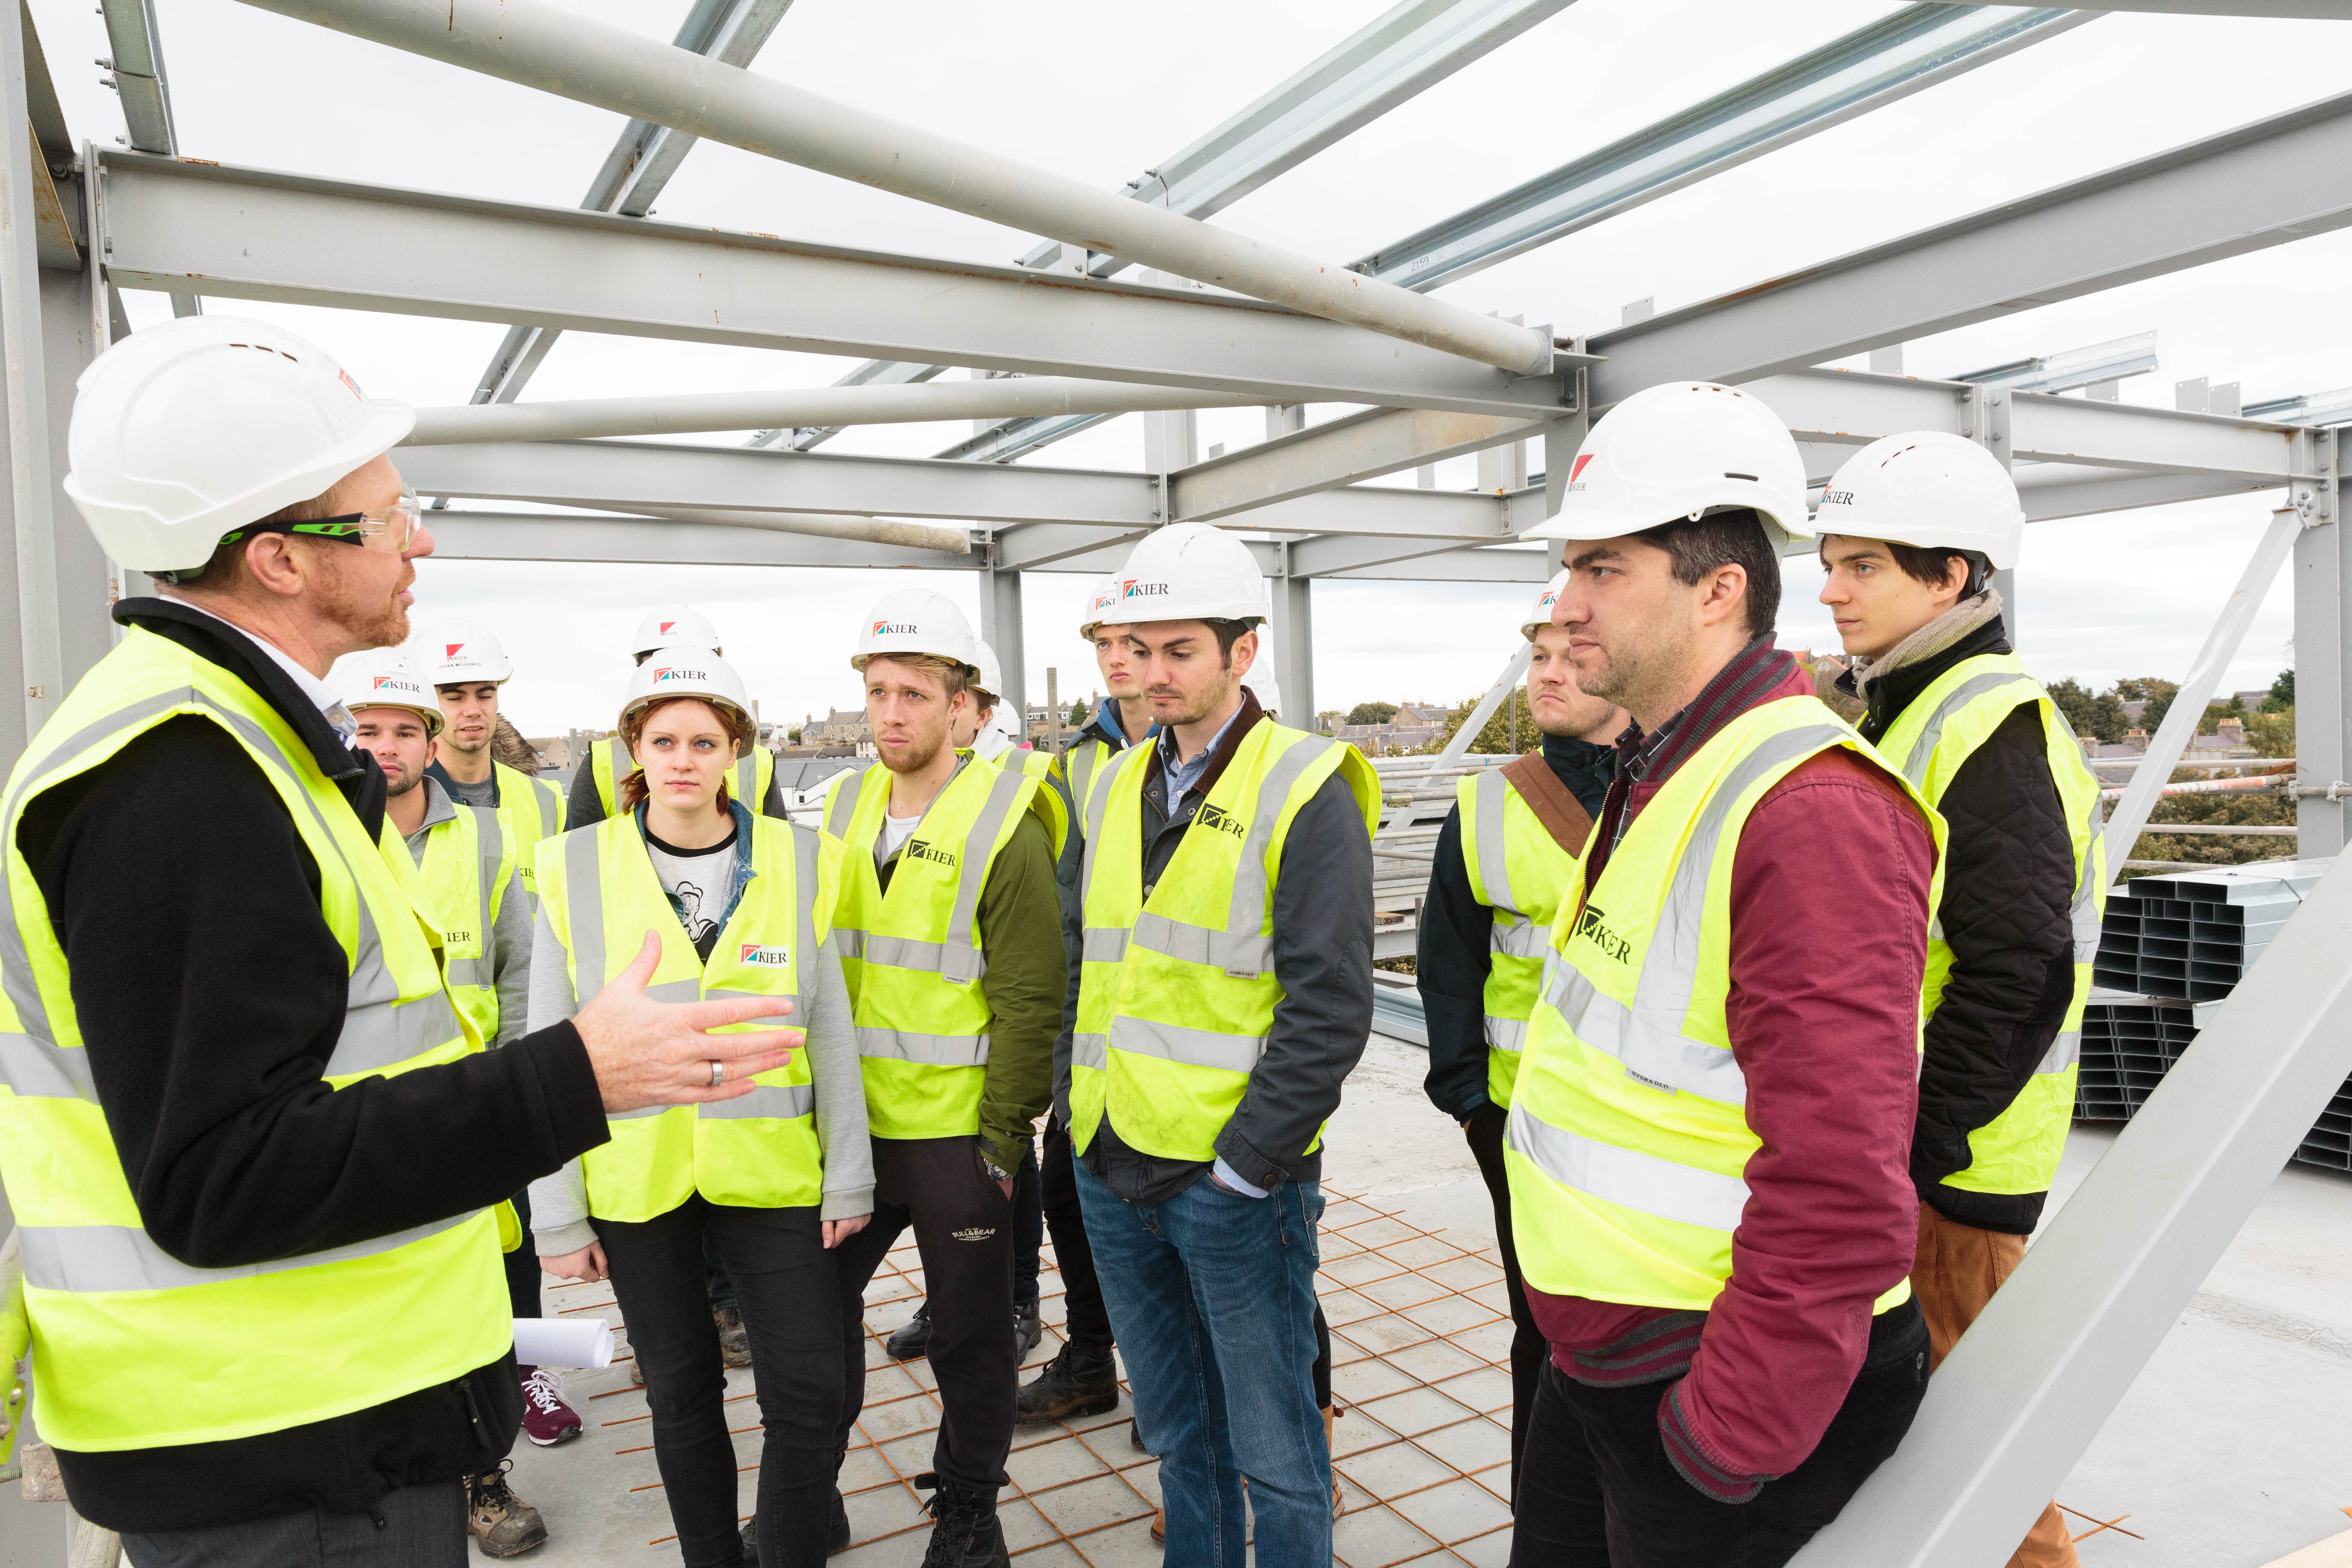 Tuesday 20th October 2015, Aberdeen, Scotland. Students from the University of Aberdeen’s structural engineering degree course, on a site tour at Alumno Developments student accommodation. (Photo:Ross Johnston/Newsline Media)